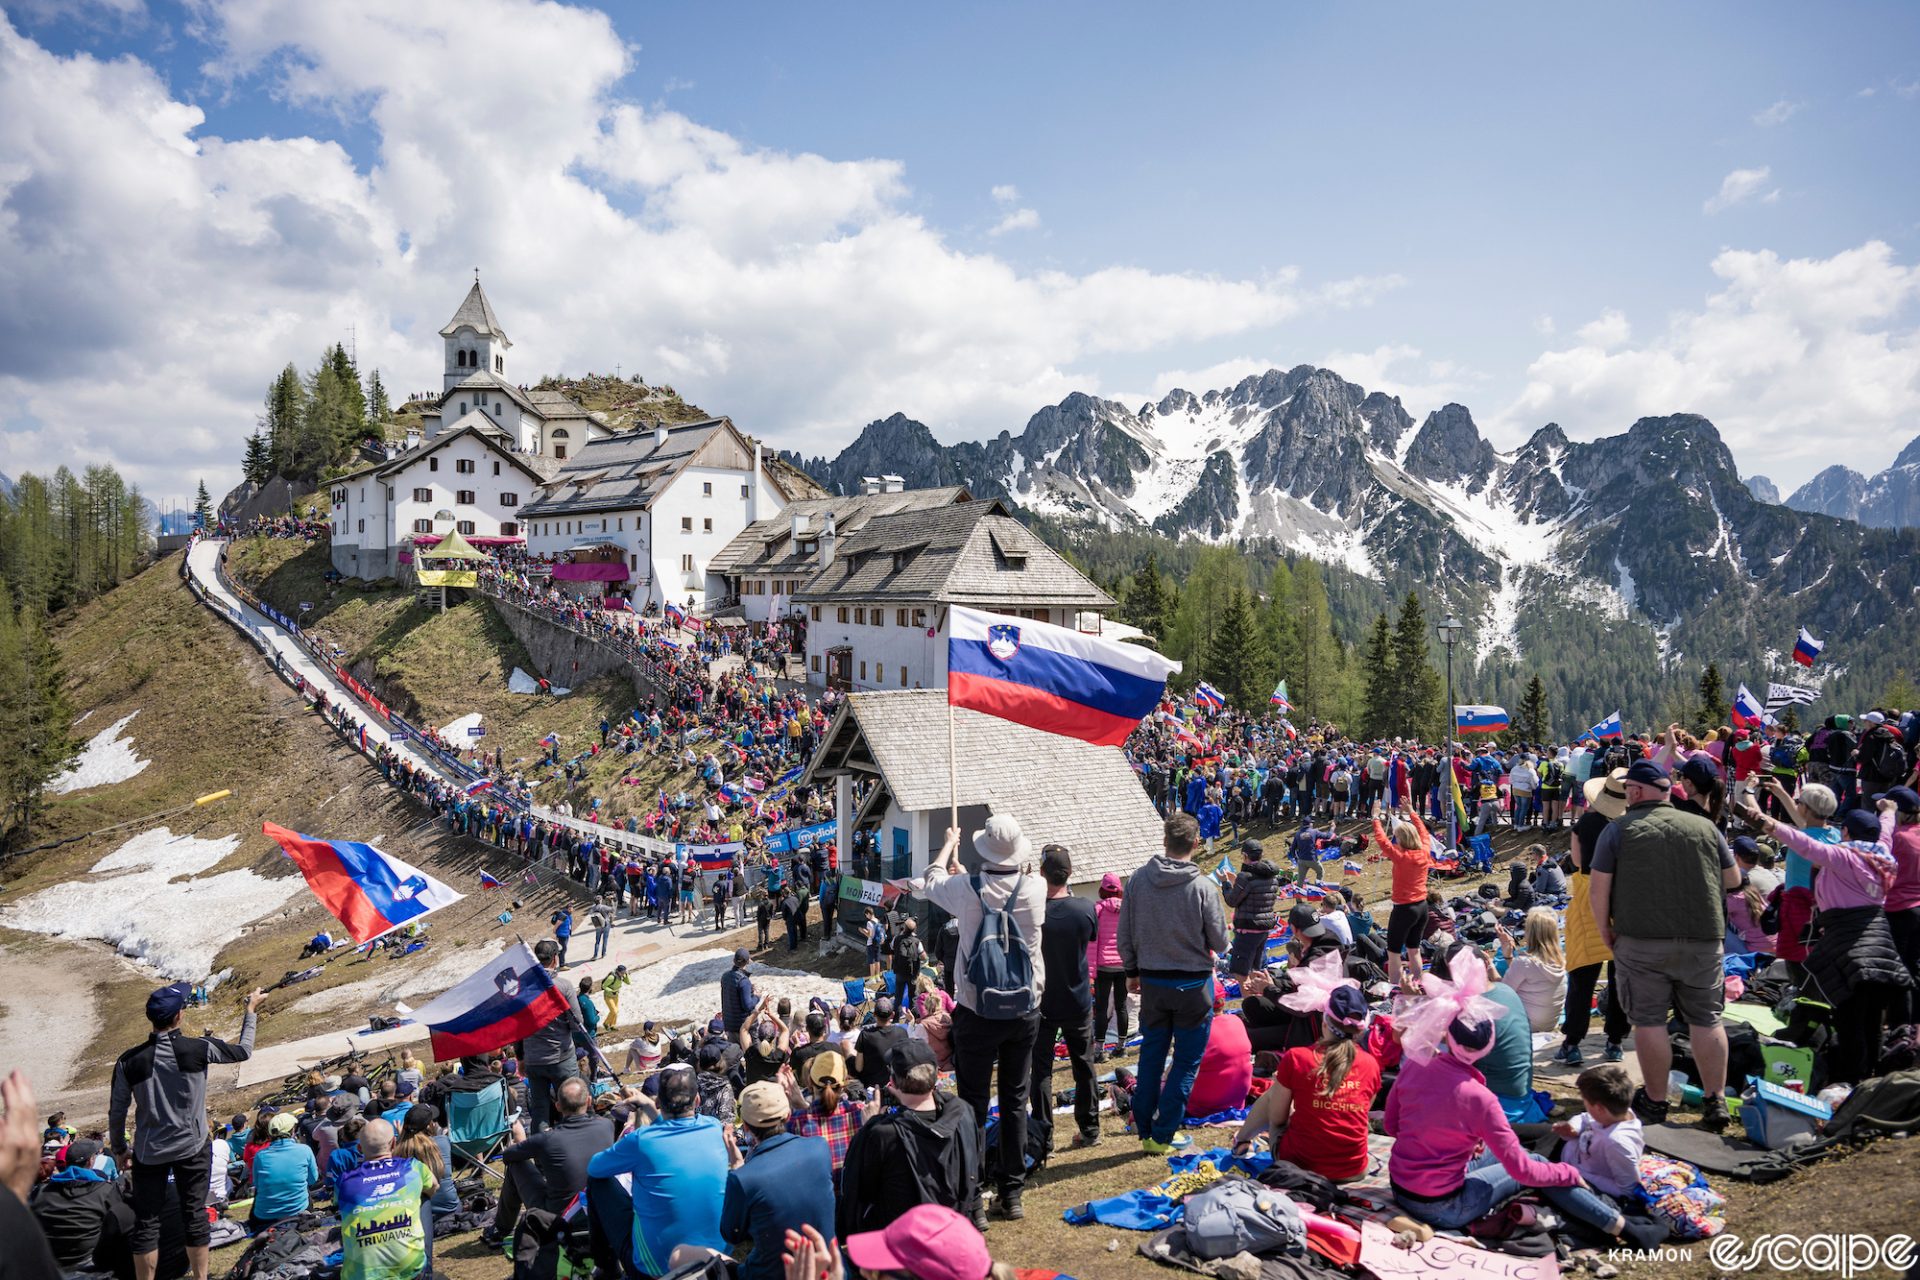 Crowds, many waving Slovenian flags, pack the slopes of the Monte Lussari monastery on stage 20 of the Giro d'Italia. Rugged, glaciated peaks loom behind as the monastery buildings are packed onto a sheer slope. 